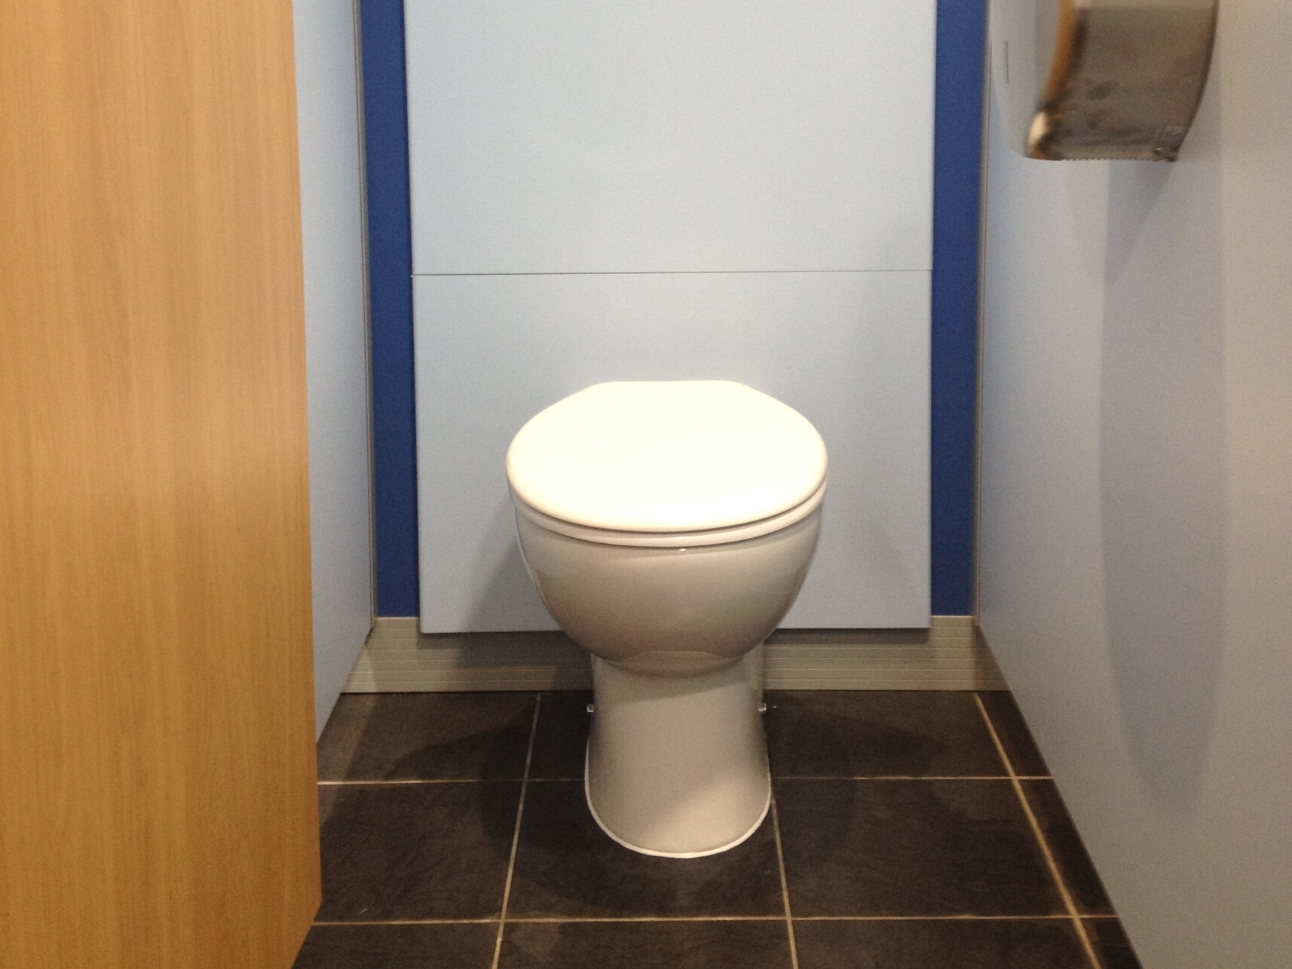 Stannah Stairlifts Case Study | Commercial Washrooms